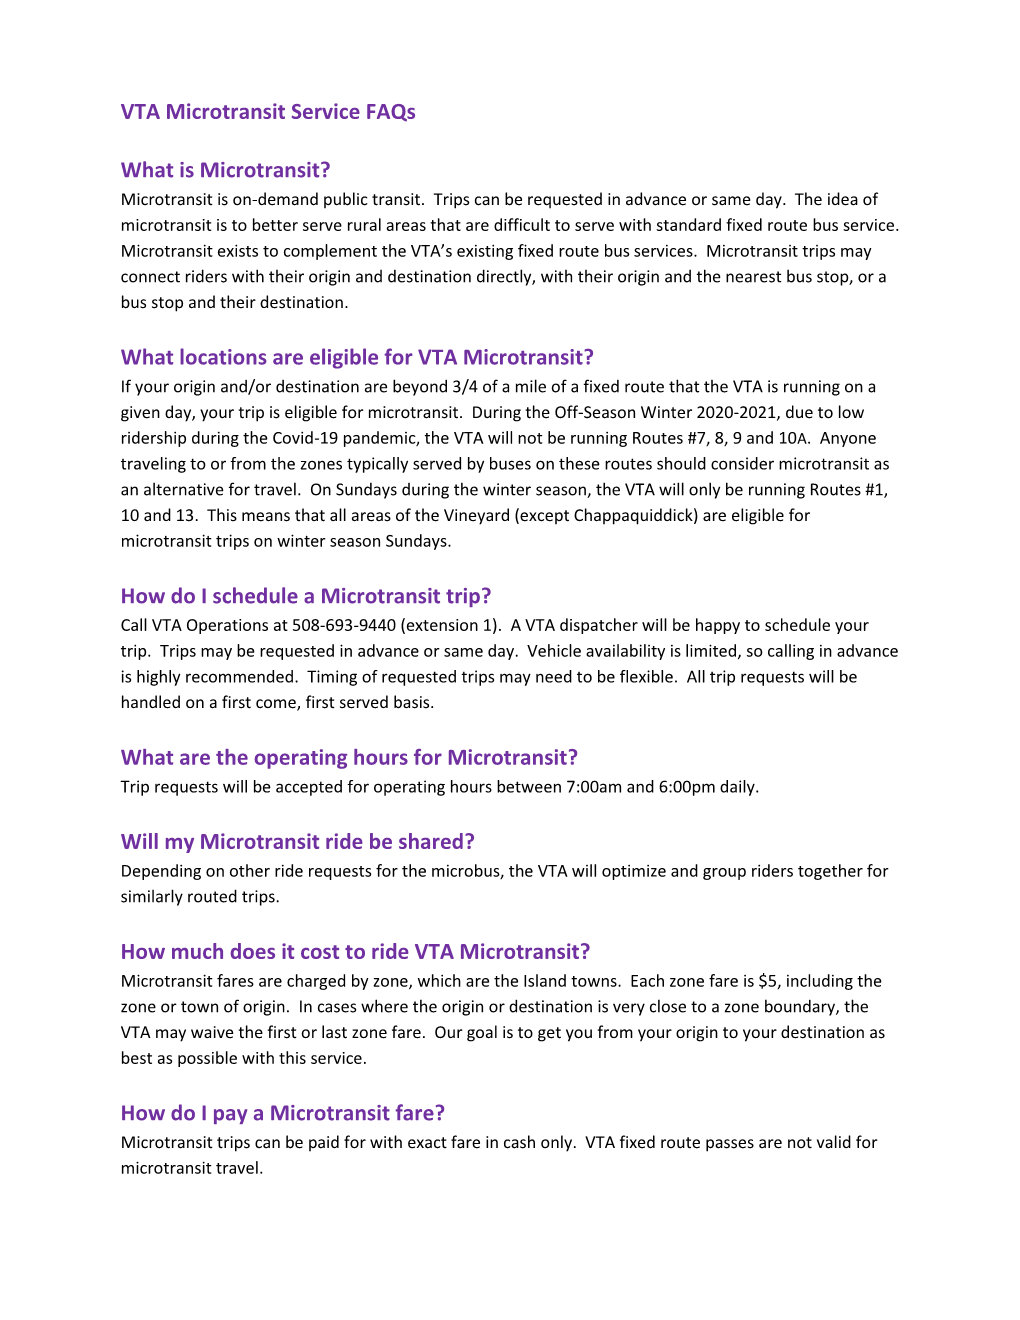 VTA Microtransit Service Faqs What Is Microtransit?